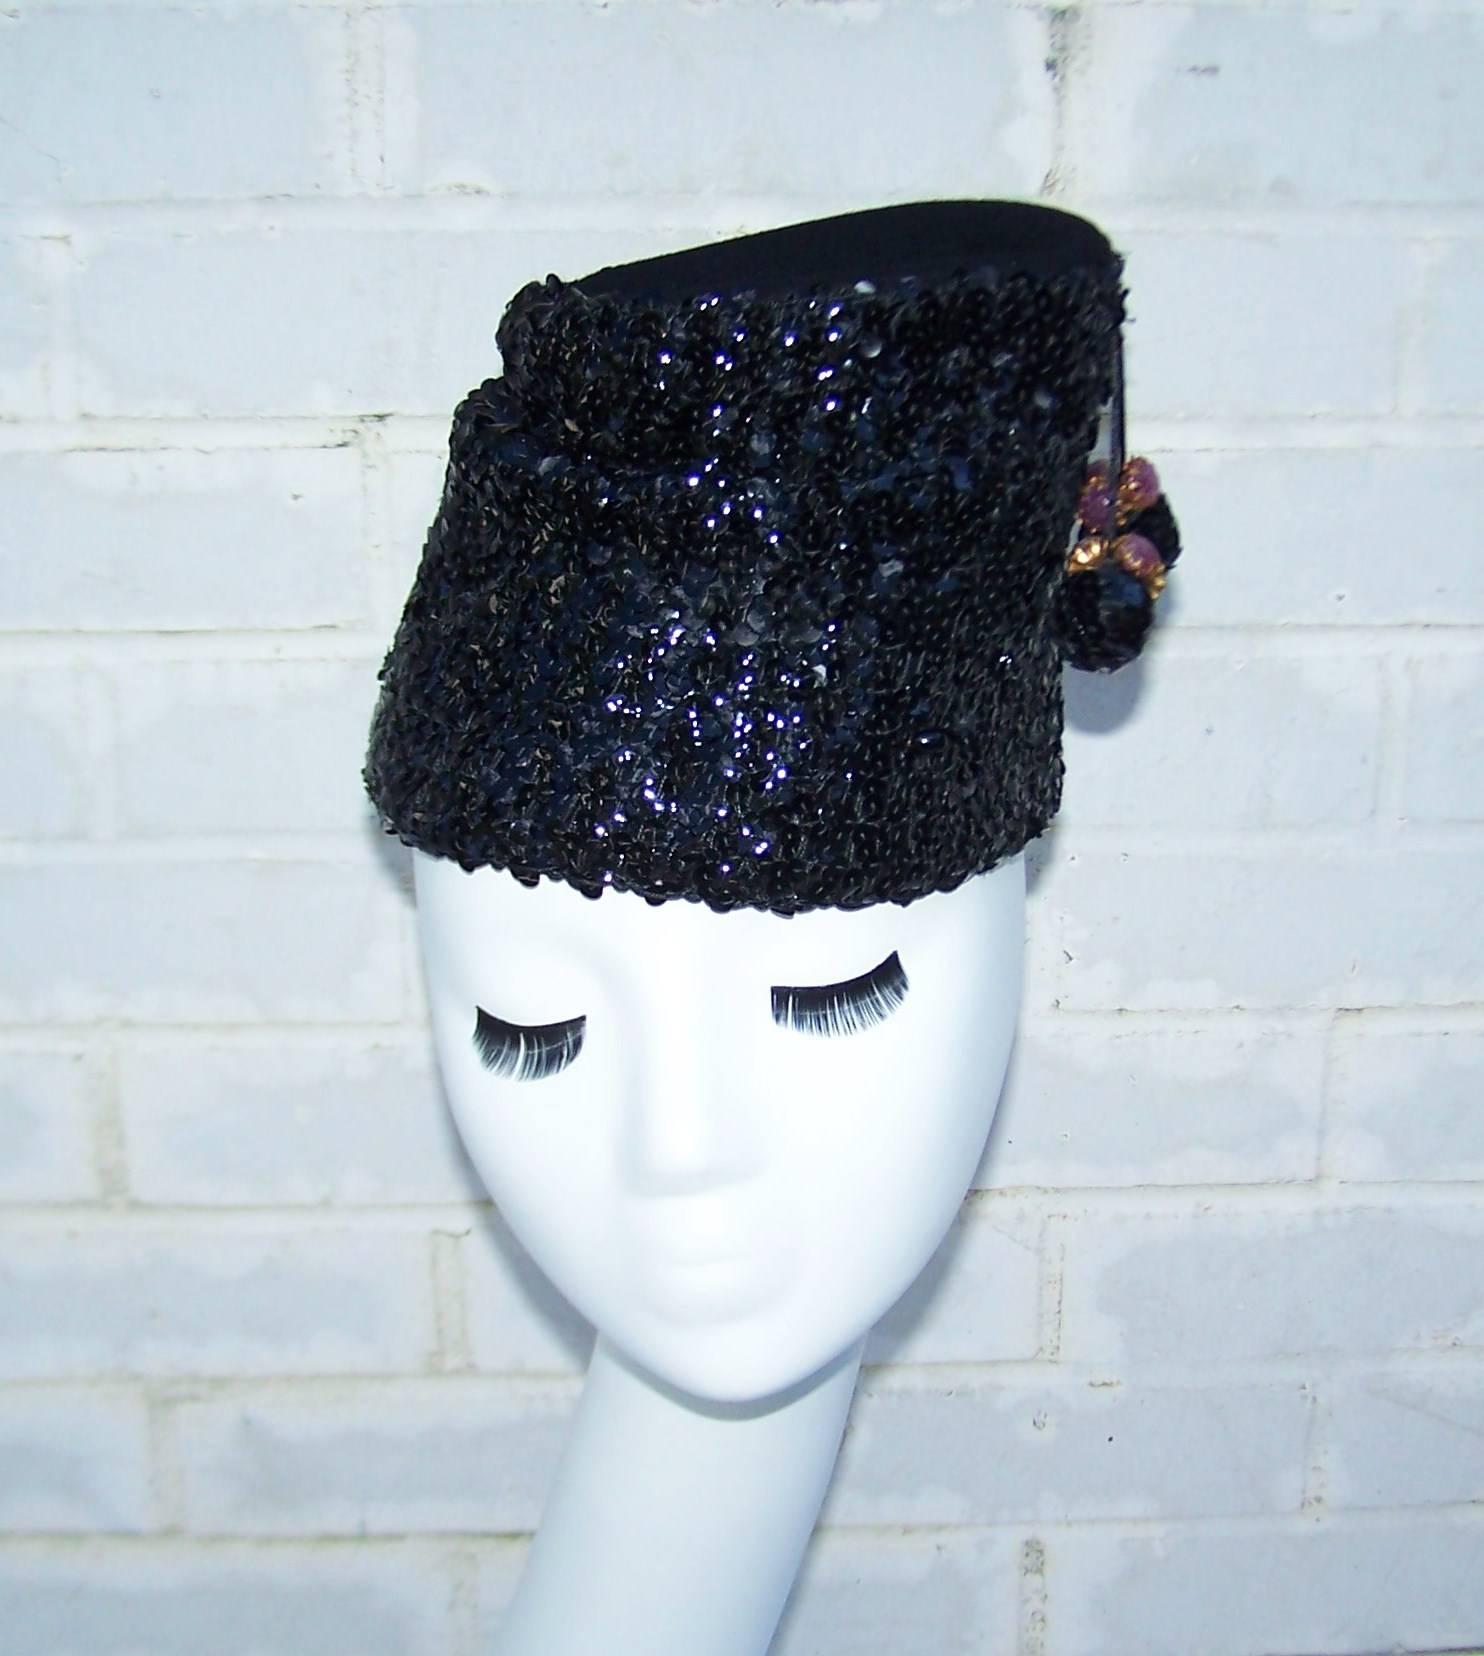 Love this glamorous topper by Henry Pollak!  Add this sequin turban style black wool hat to anything from evening wear to a daytime wool jacket for instant chic.  It begs to be worn slightly askew and is designed with a slouch for just the right